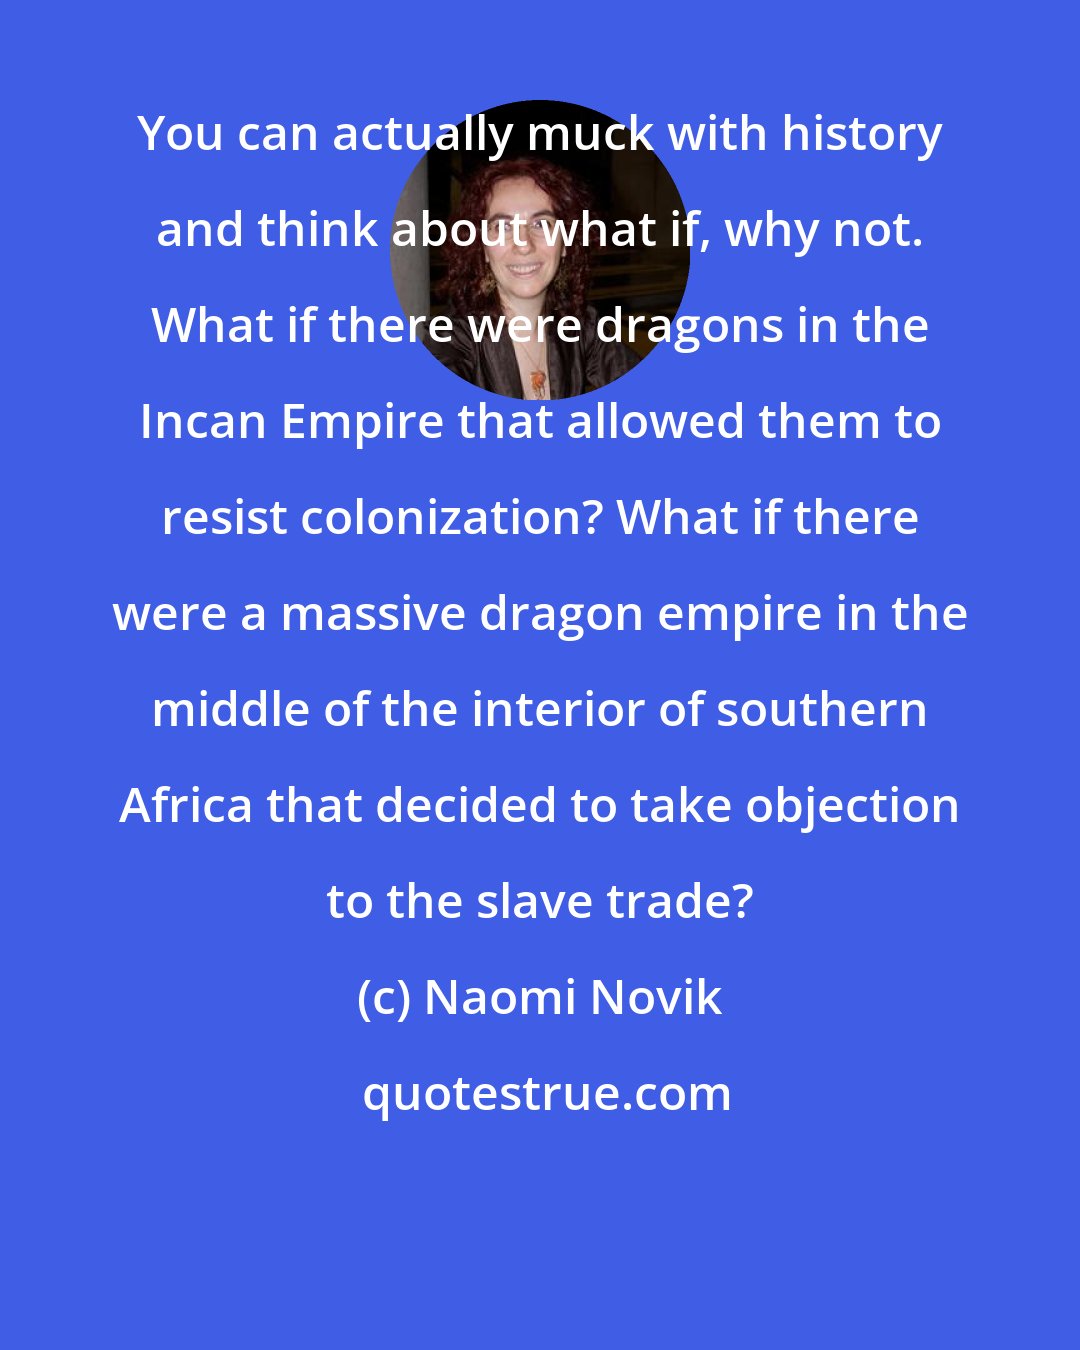 Naomi Novik: You can actually muck with history and think about what if, why not. What if there were dragons in the Incan Empire that allowed them to resist colonization? What if there were a massive dragon empire in the middle of the interior of southern Africa that decided to take objection to the slave trade?